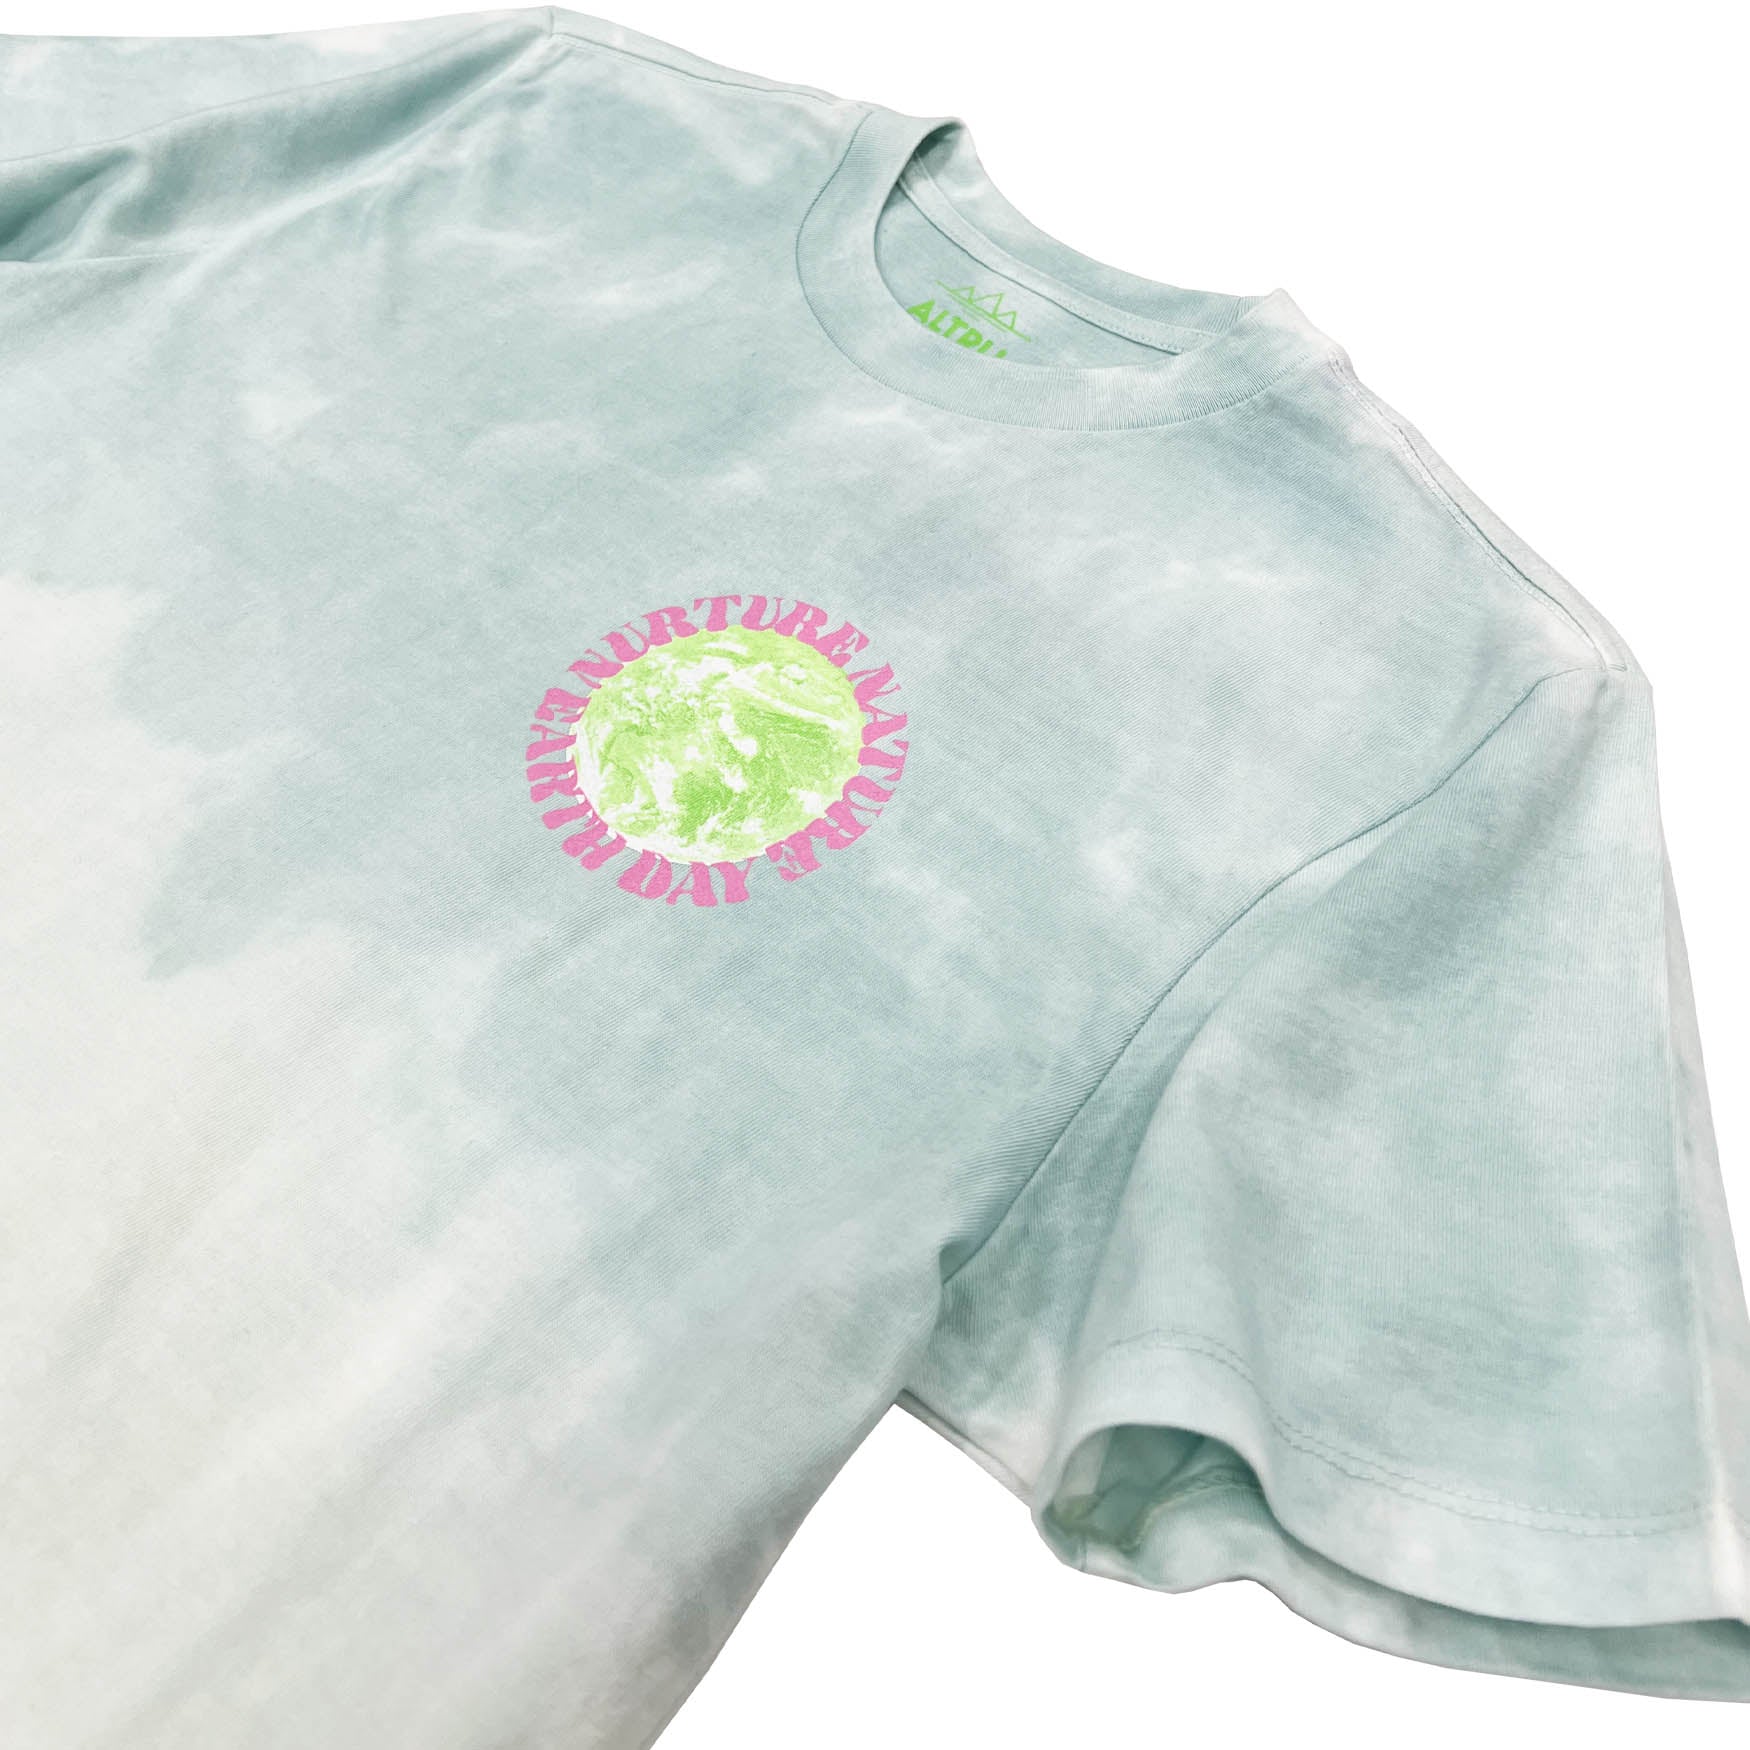 Altru Nurture Nature graphic on multi color dyed t-shirt. Chest graphic on the front.